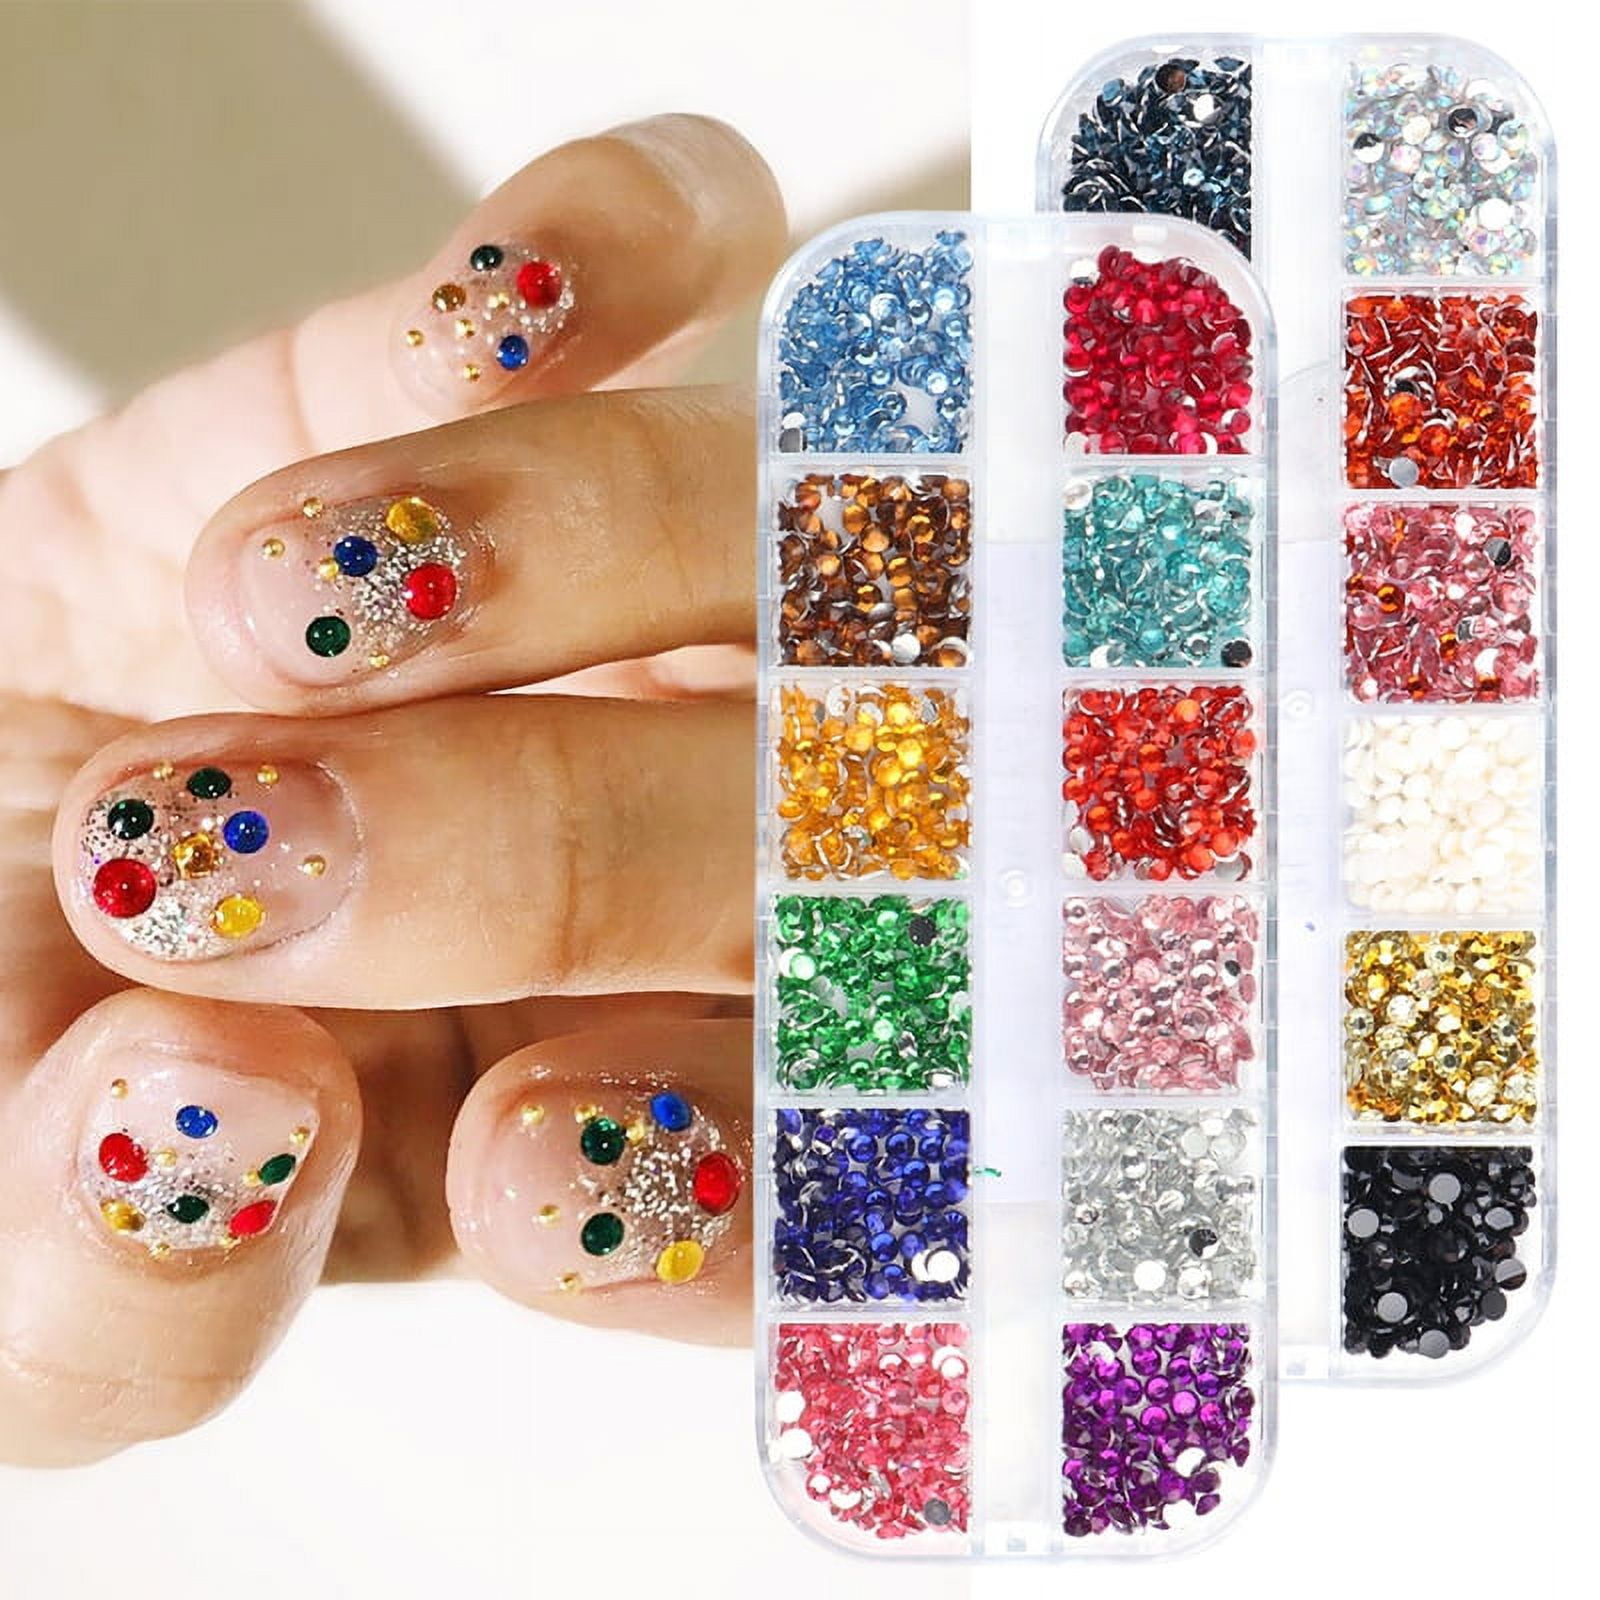 Bcloud Nail Resin Rhinestone Flat Back Beautify Nails 3mm 3D Manicure Nail Art Decorations for Girls, Other